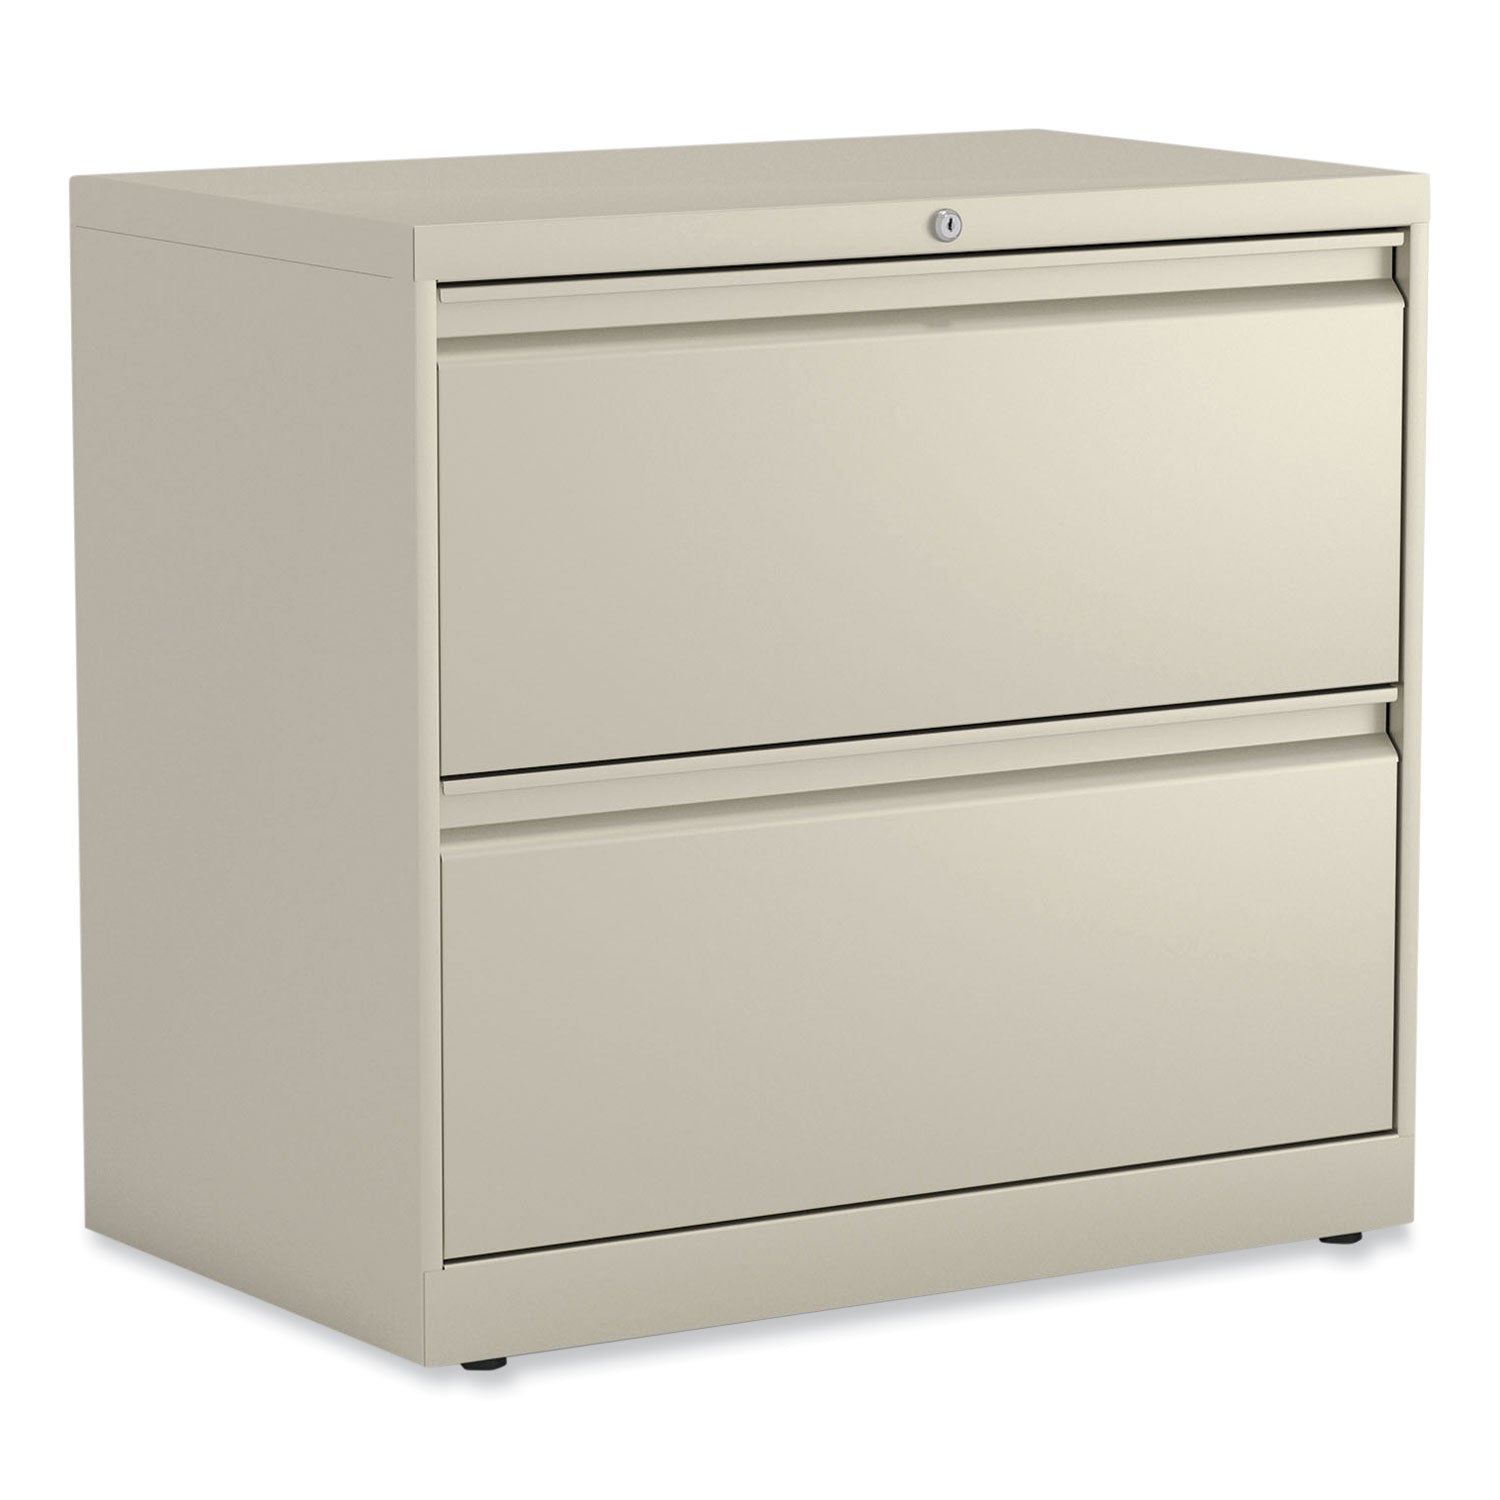 lateral-file-2-legal-letter-size-file-drawers-putty-30-x-1863-x-28_alehlf3029py - 2